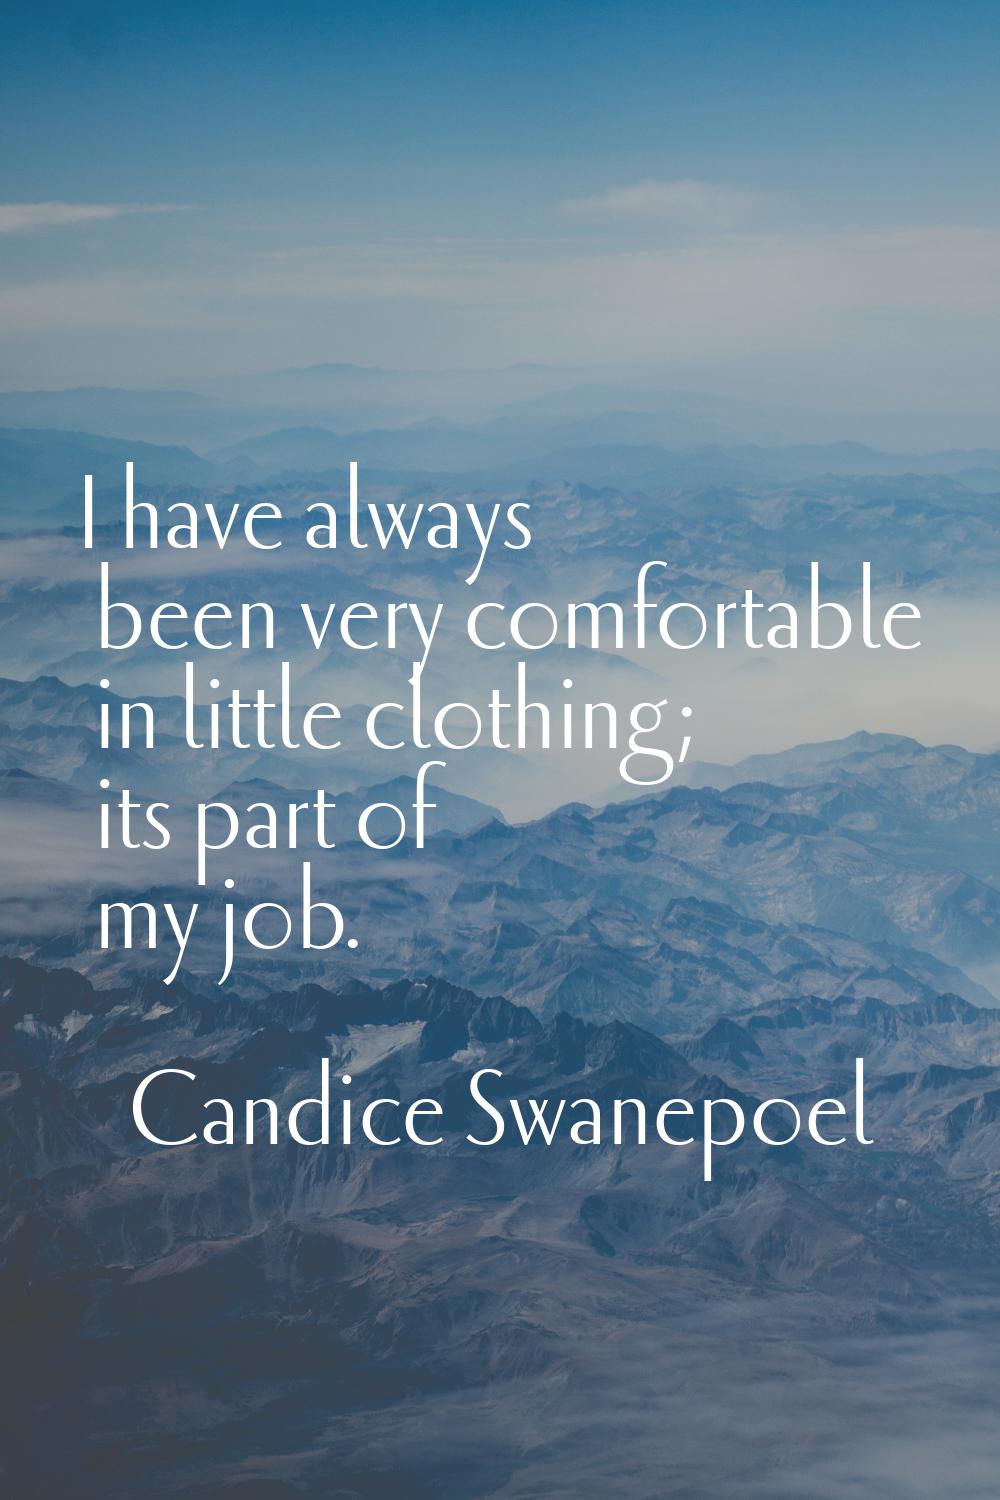 I have always been very comfortable in little clothing; its part of my job.